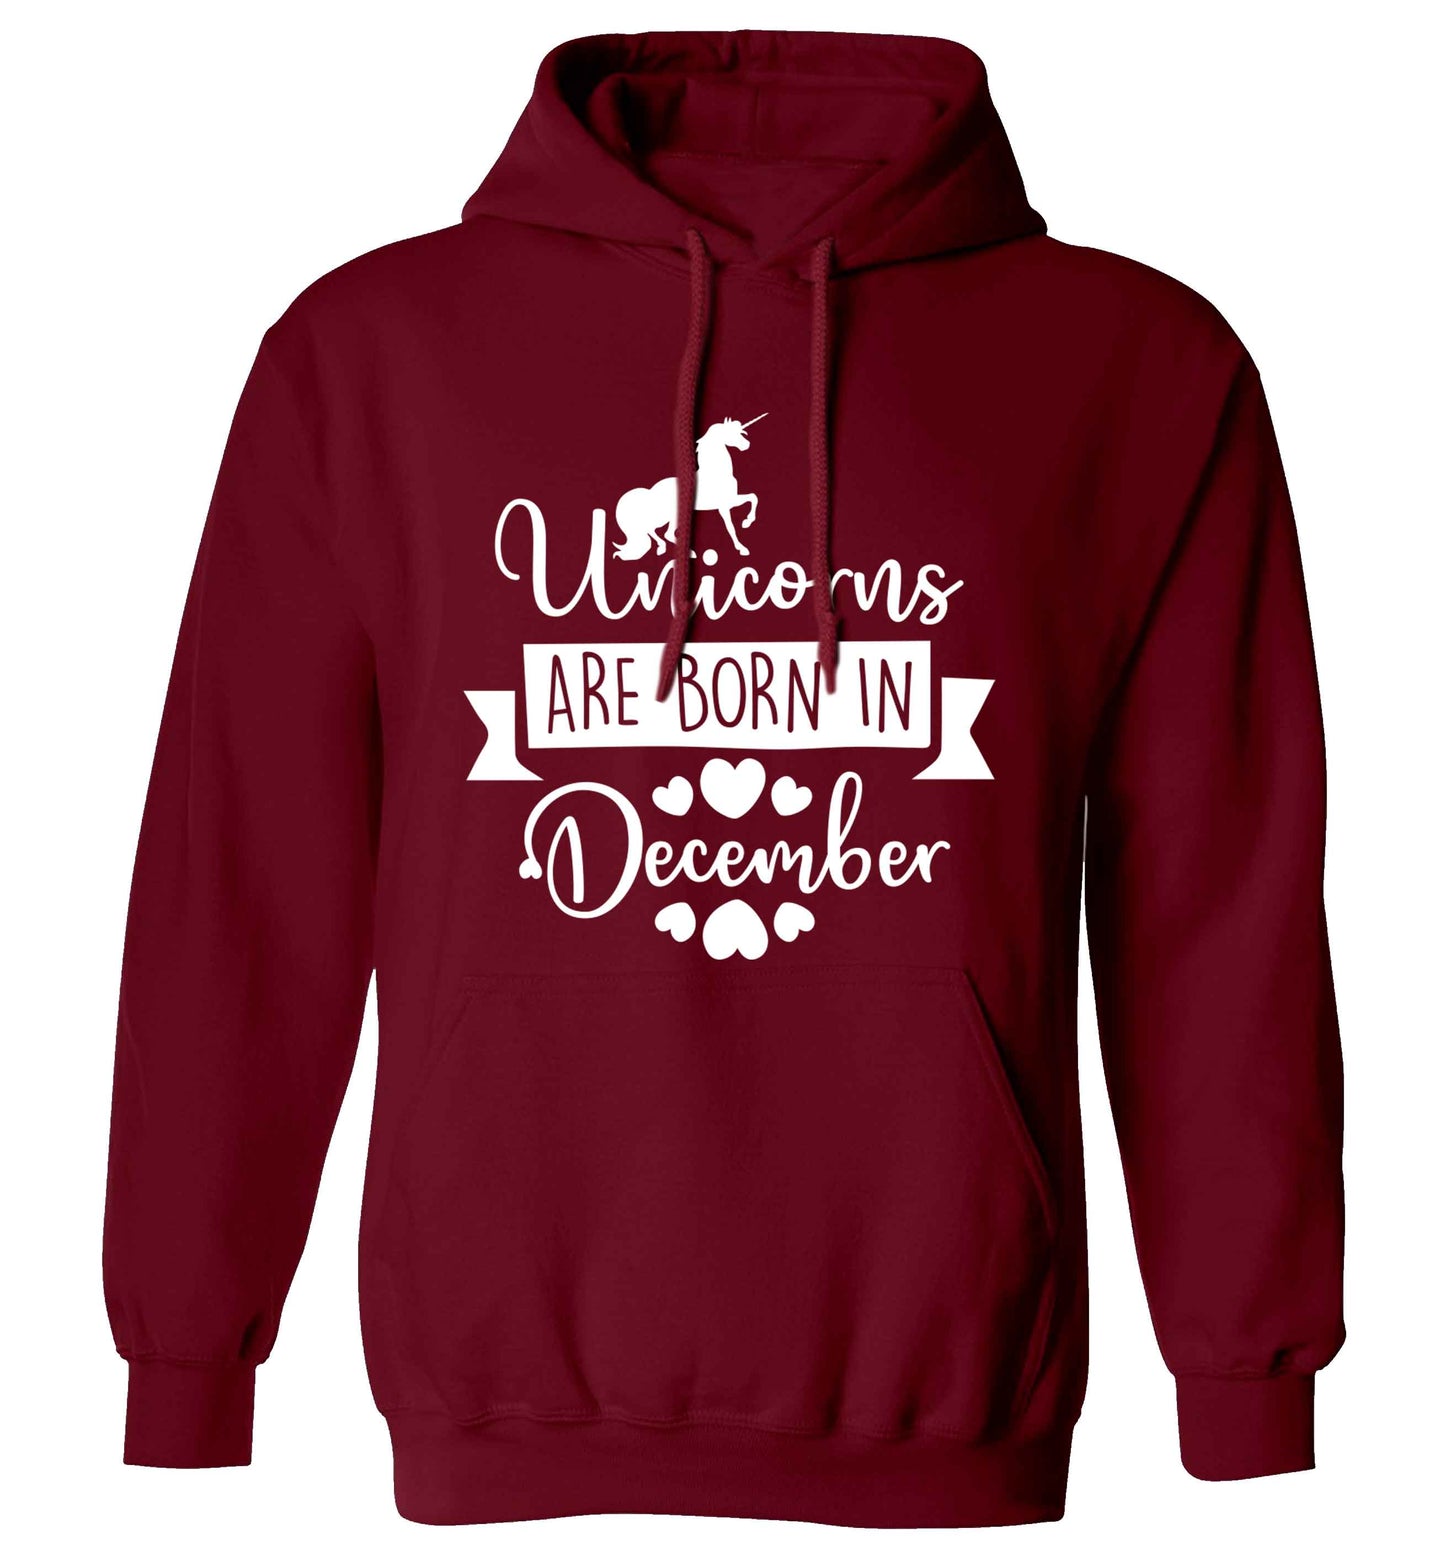 Unicorns are born in December adults unisex maroon hoodie 2XL